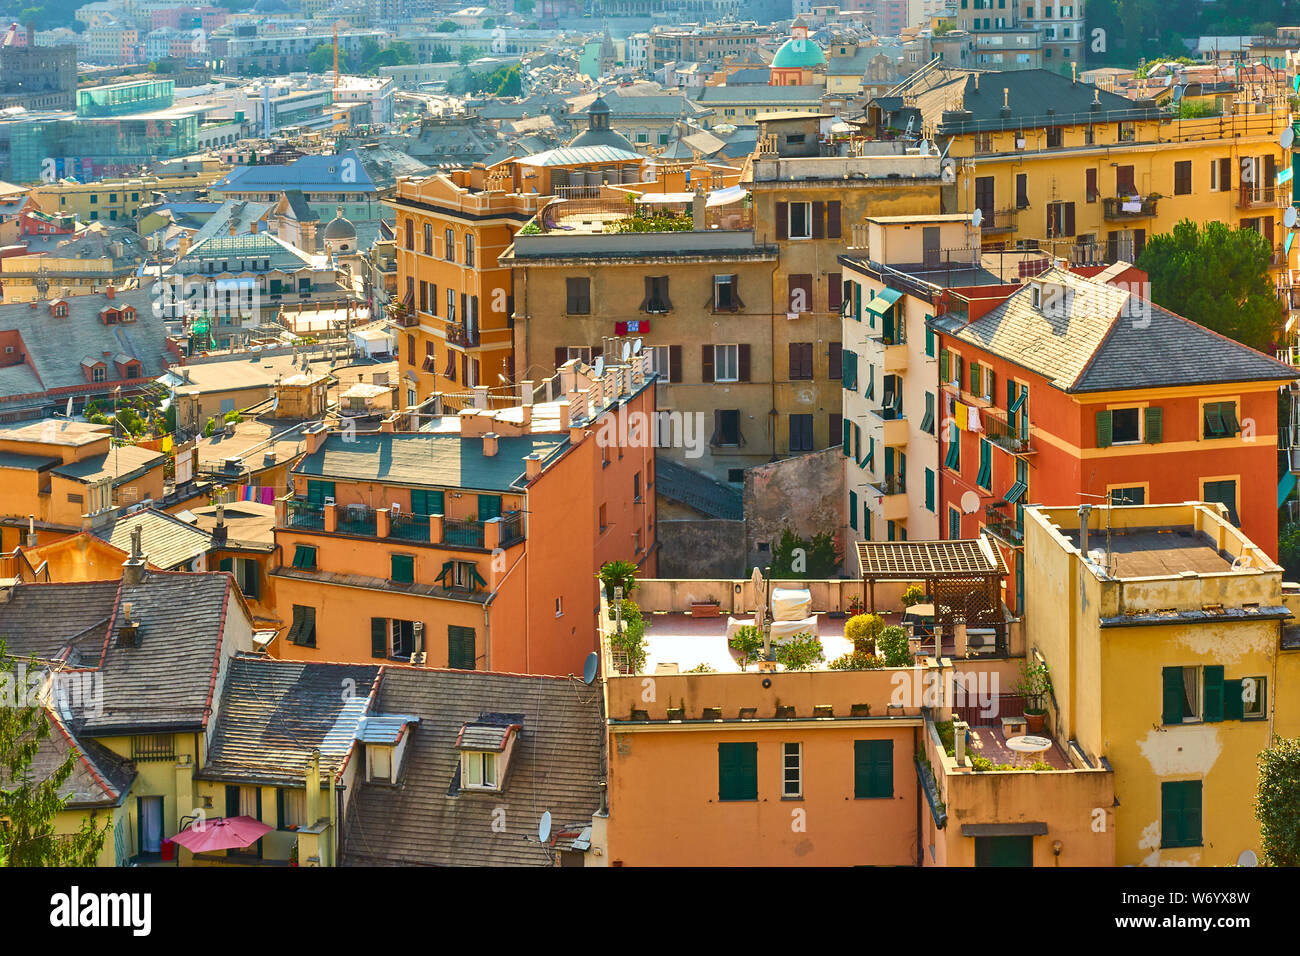 Residential buildings of Castelletto district in Genova, Italy Stock Photo